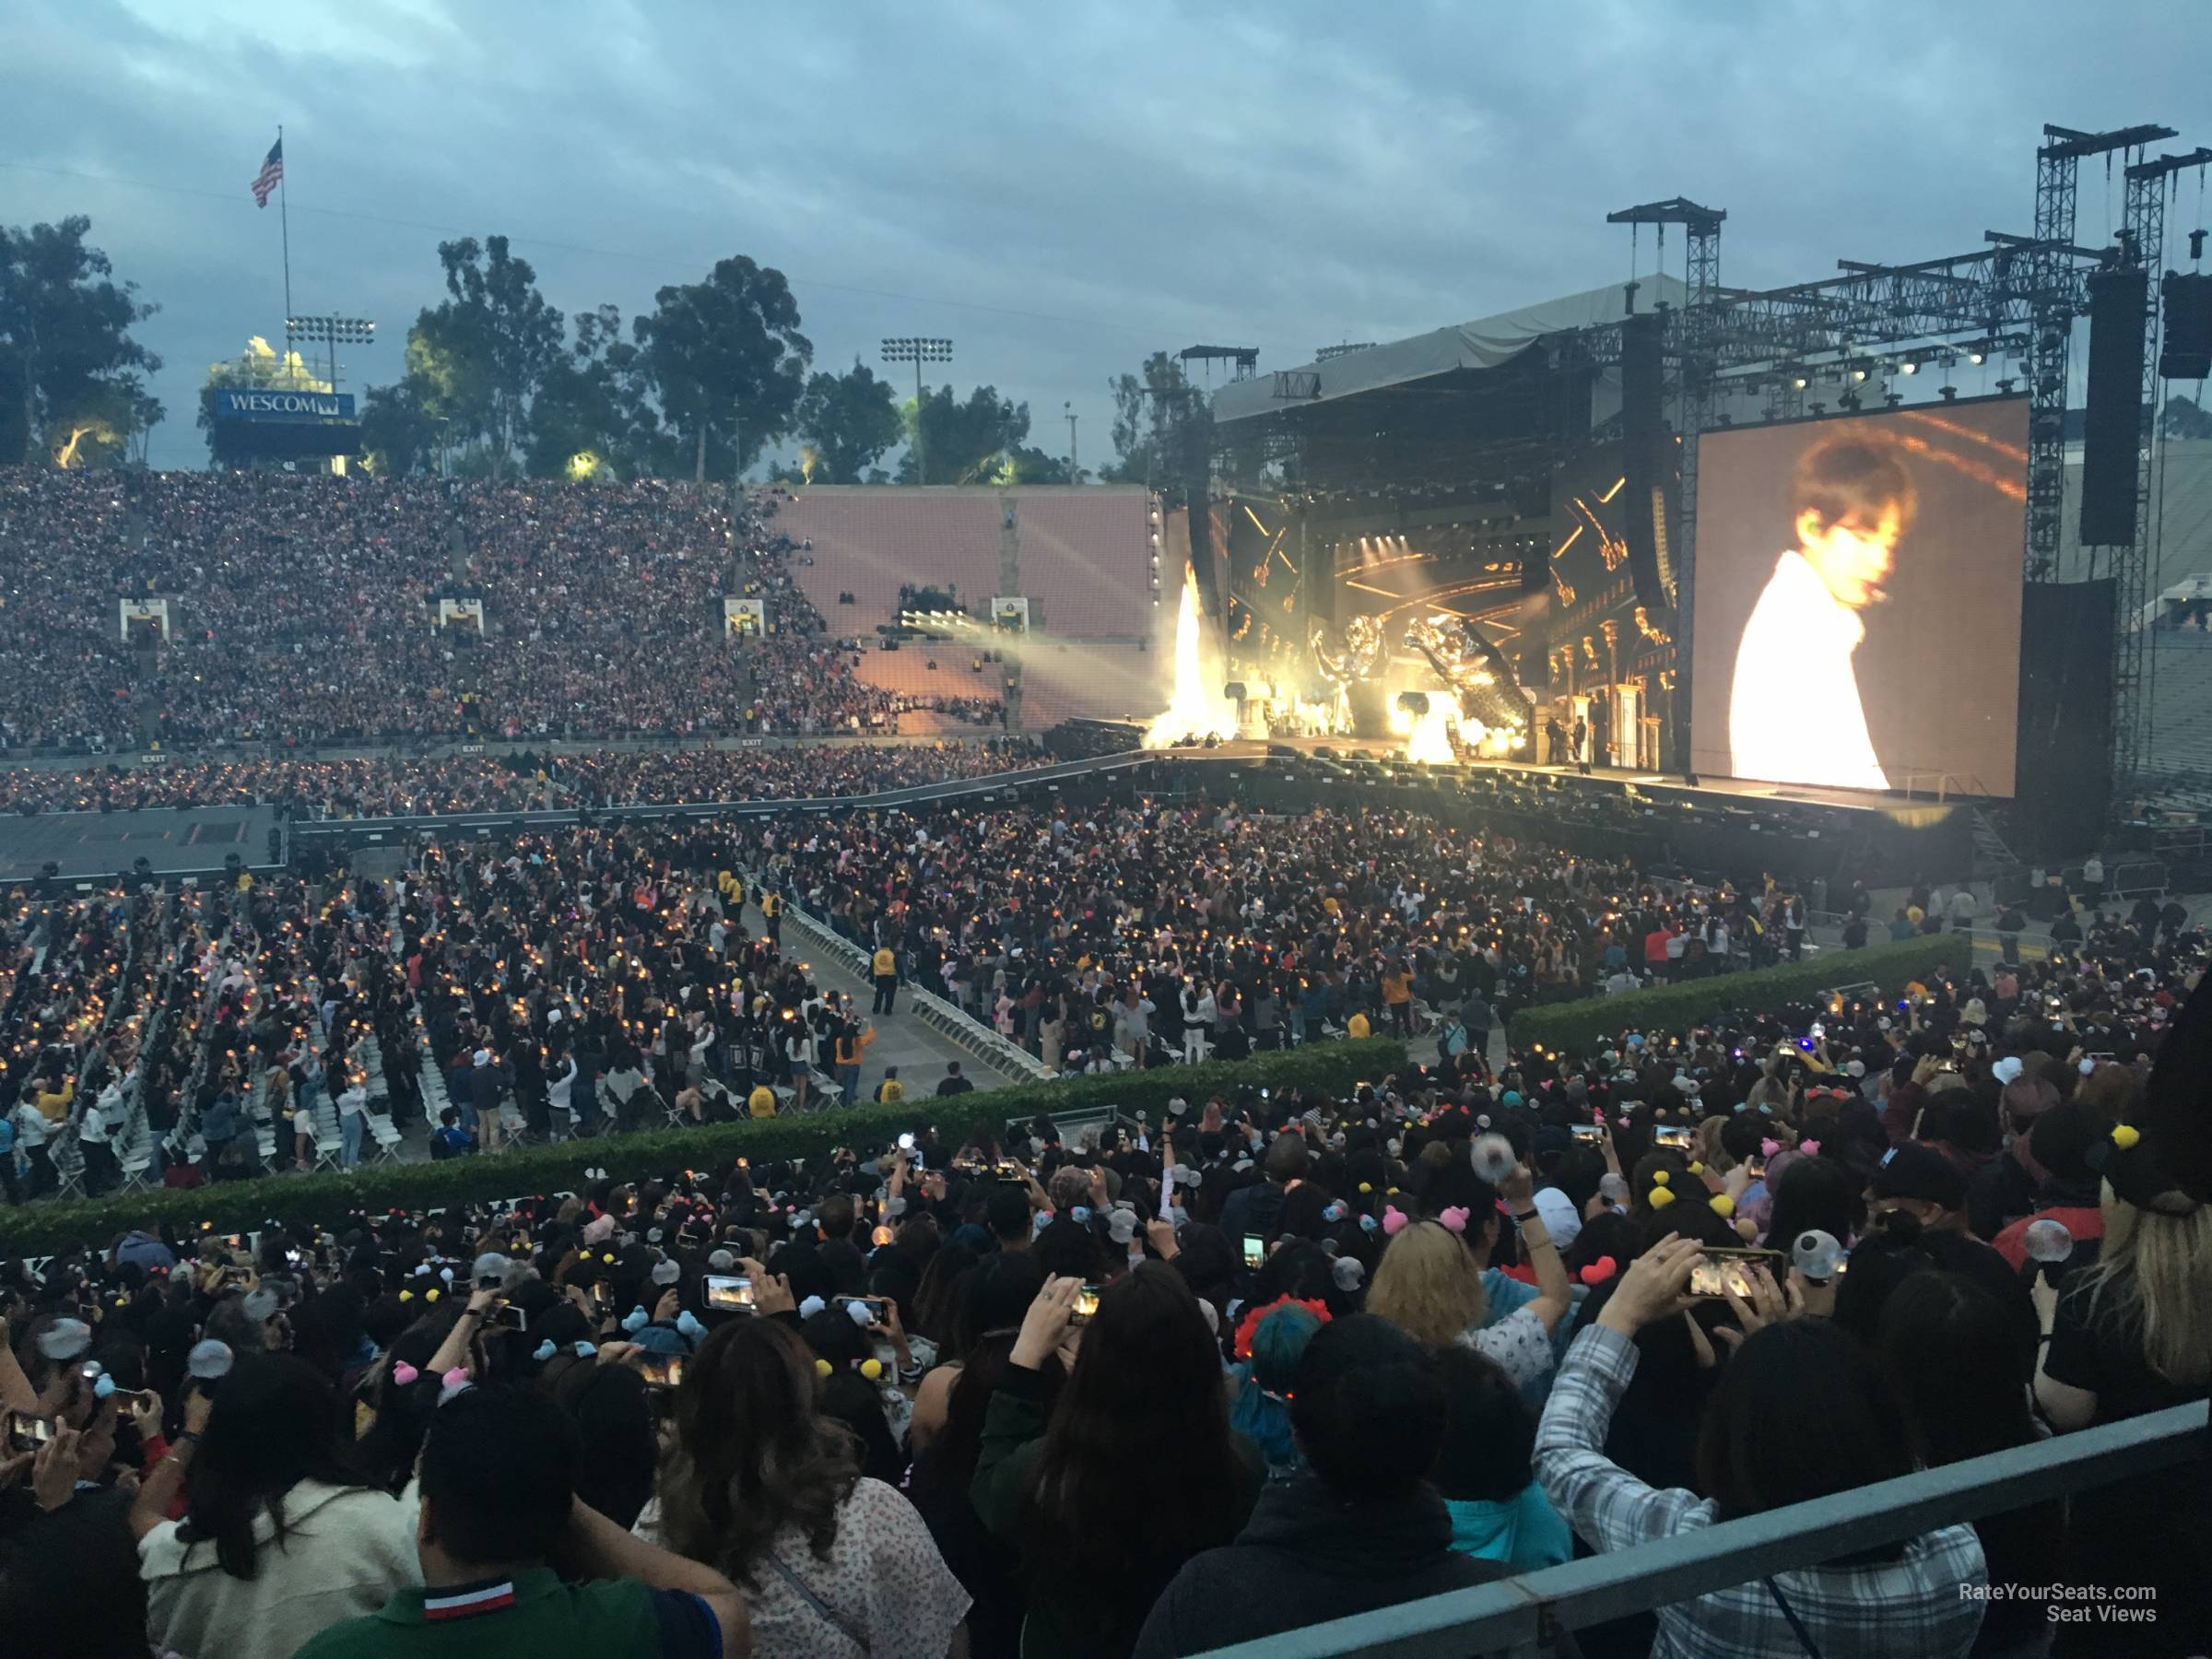 section 19, row 30 seat view  for concert - rose bowl stadium